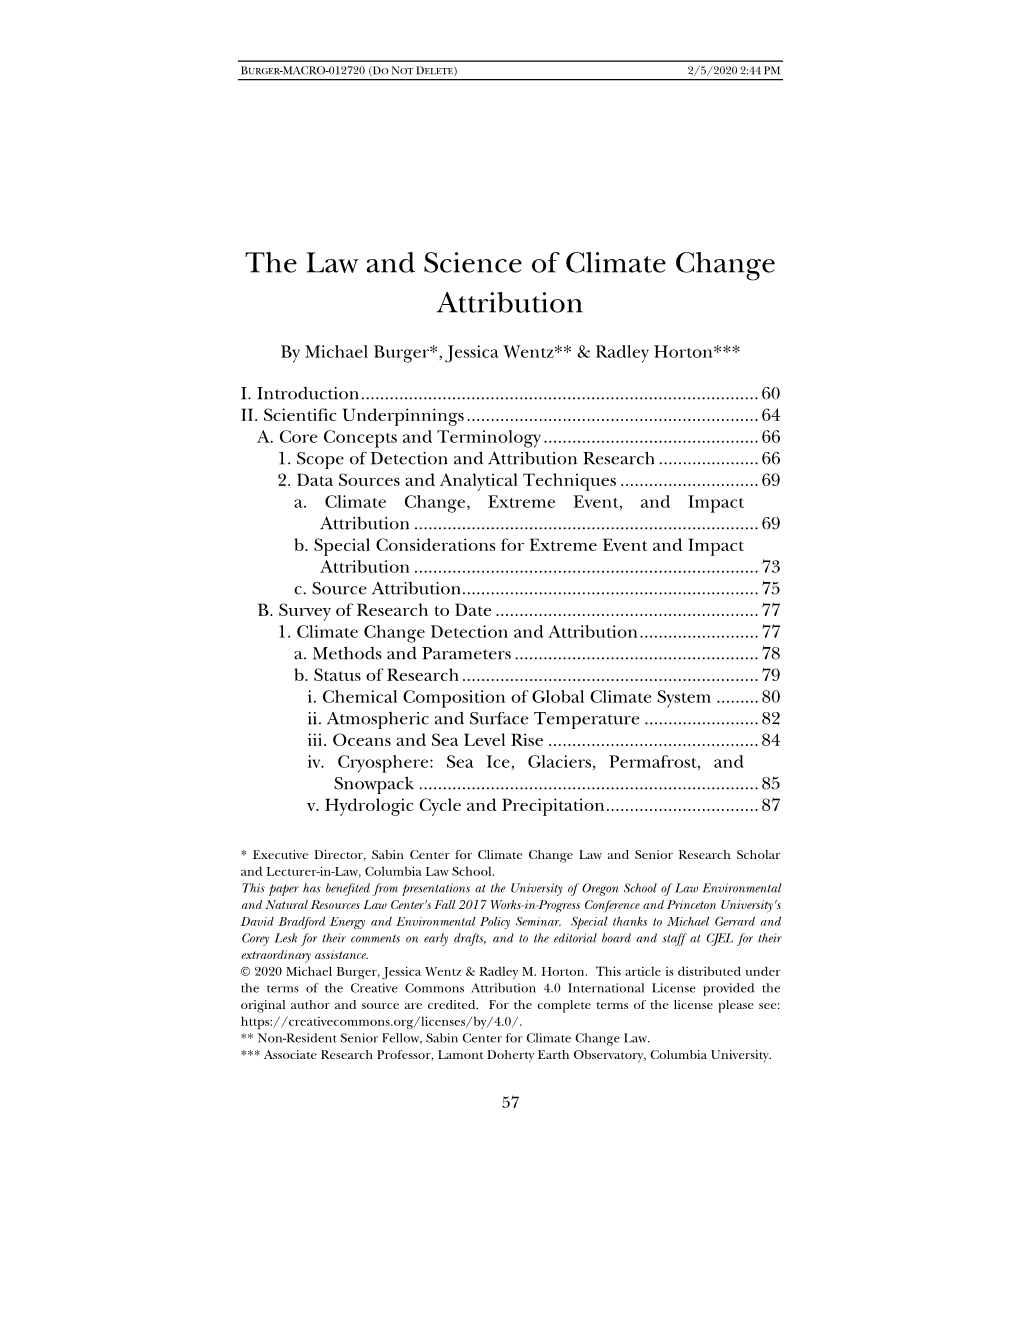 The Law and Science of Climate Change Attribution